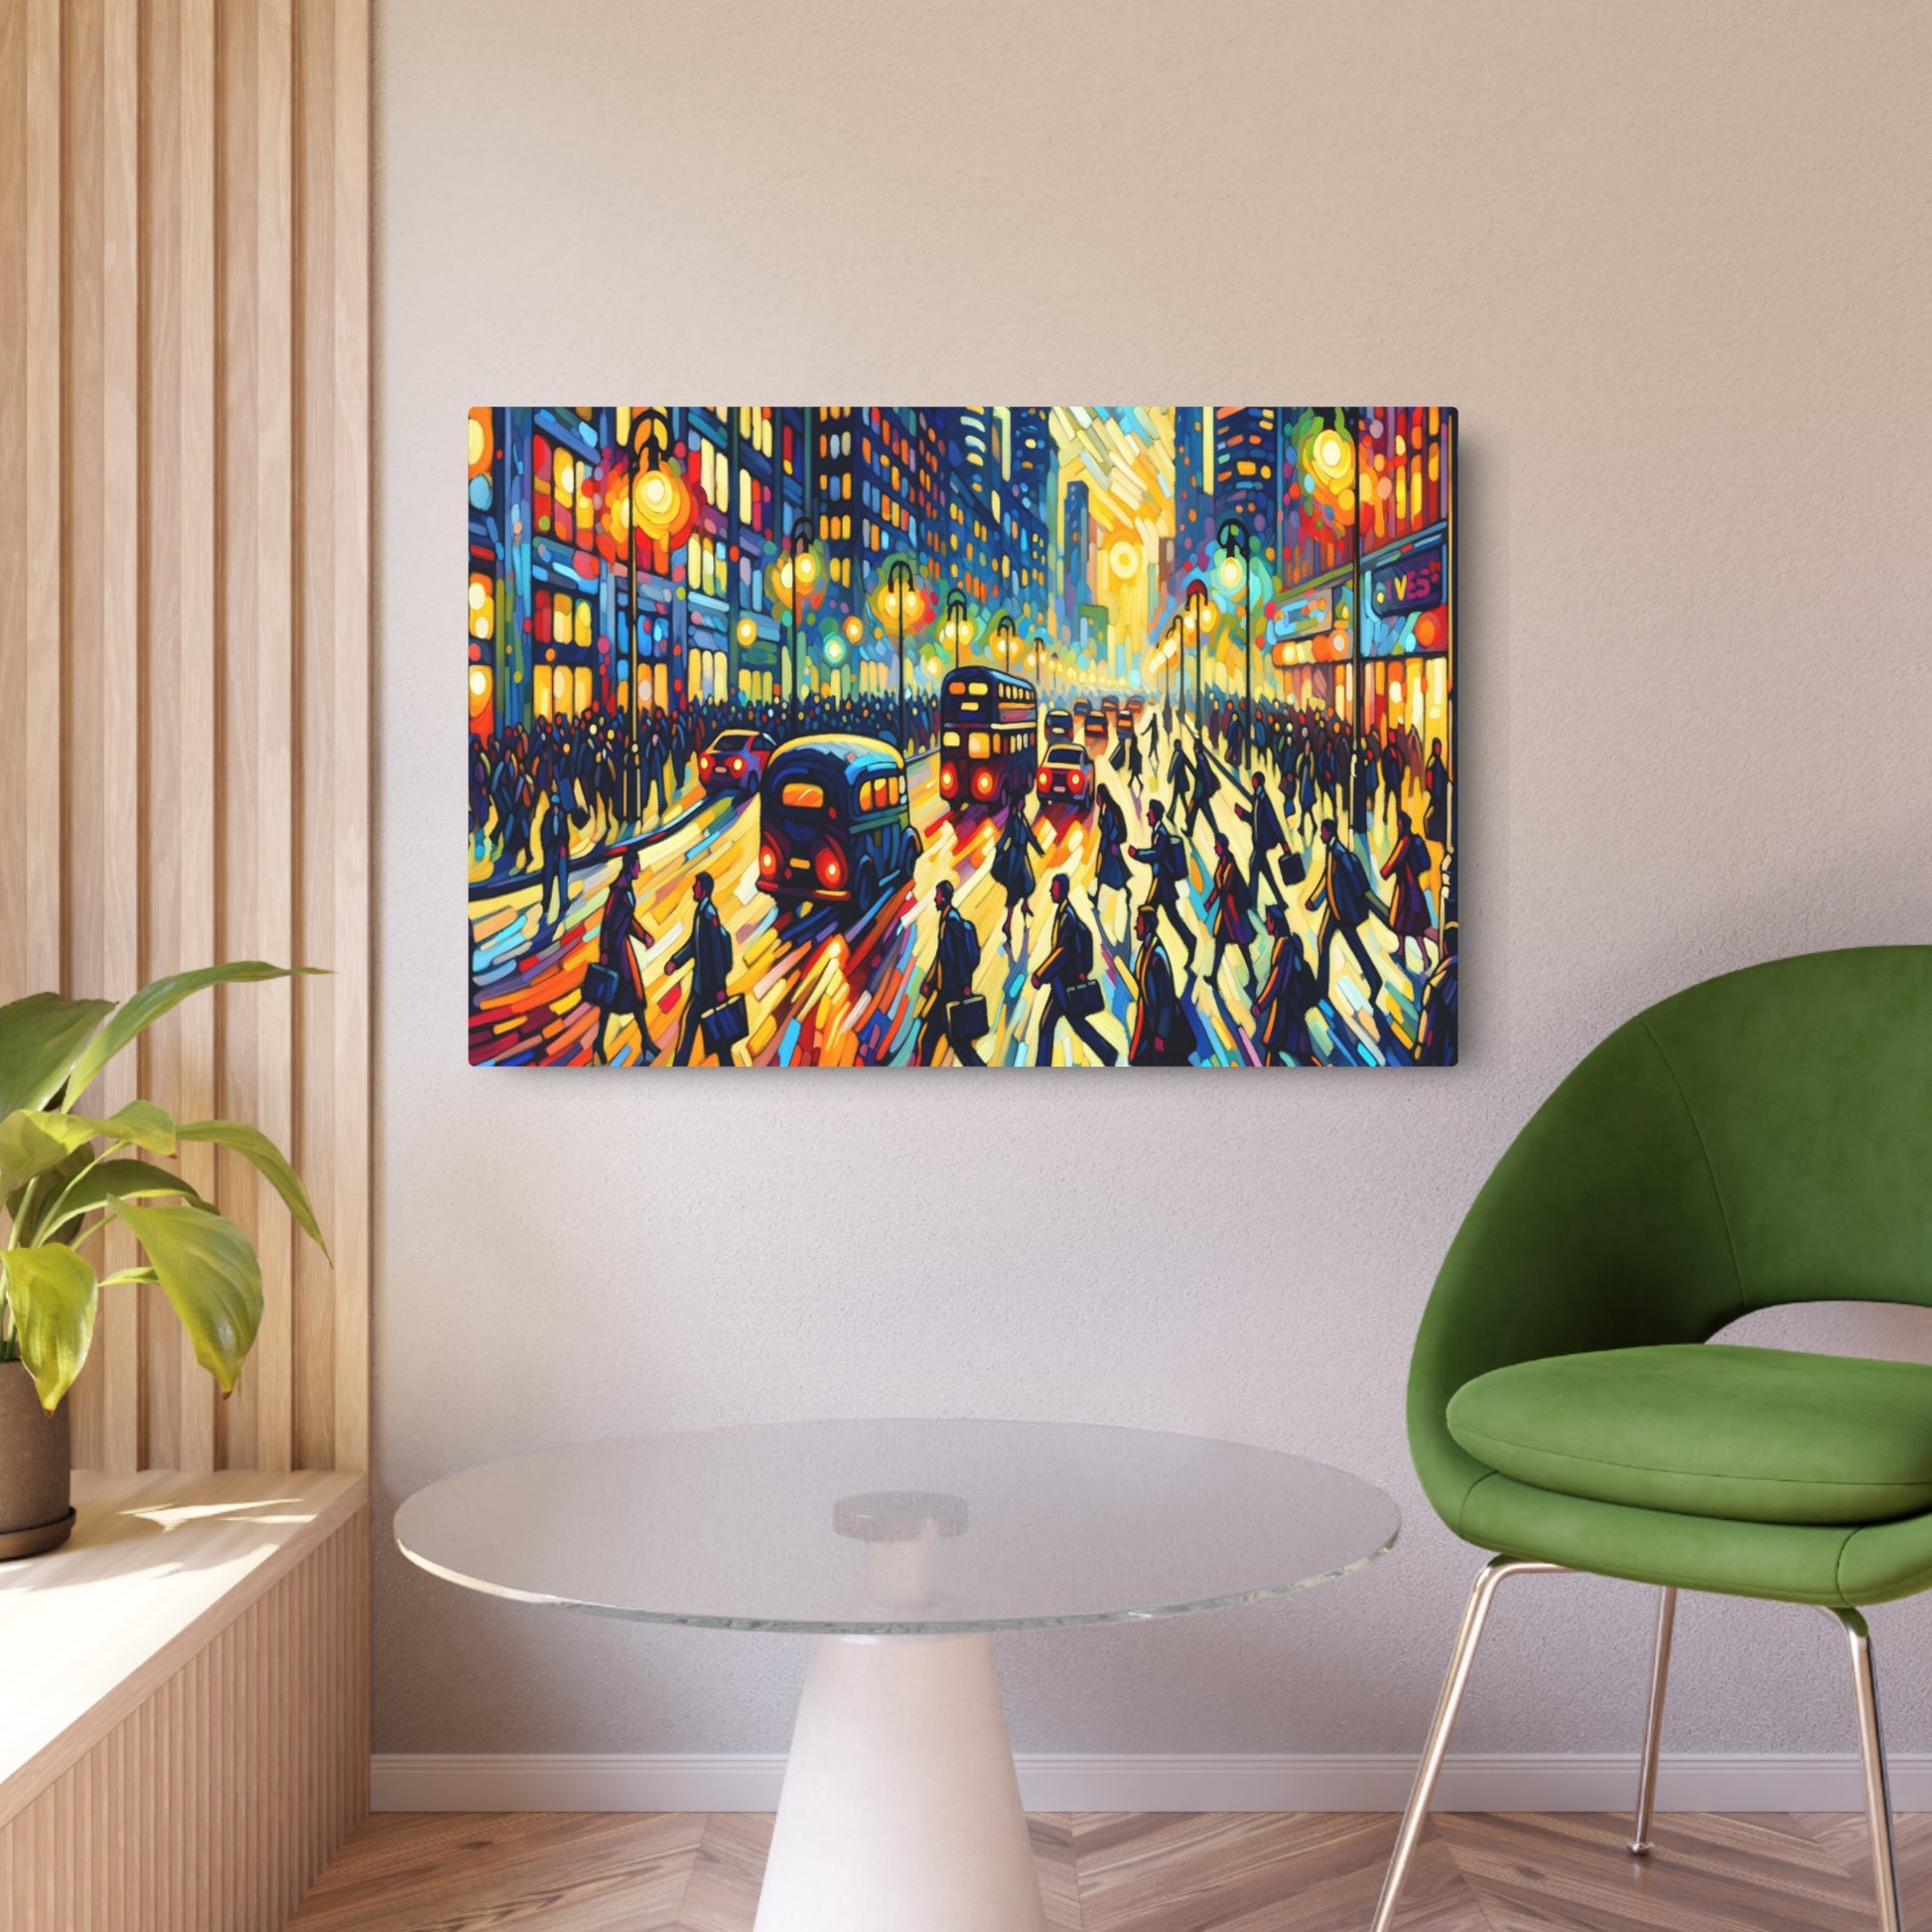 Metal Poster Art | "Expressionist Western Art: Animated City Street Scene in Evening - Vibrant and Passionate Expressionism Painting of People Rushing Home After Work" - Metal Poster Art 36″ x 24″ (Horizontal) 0.12''